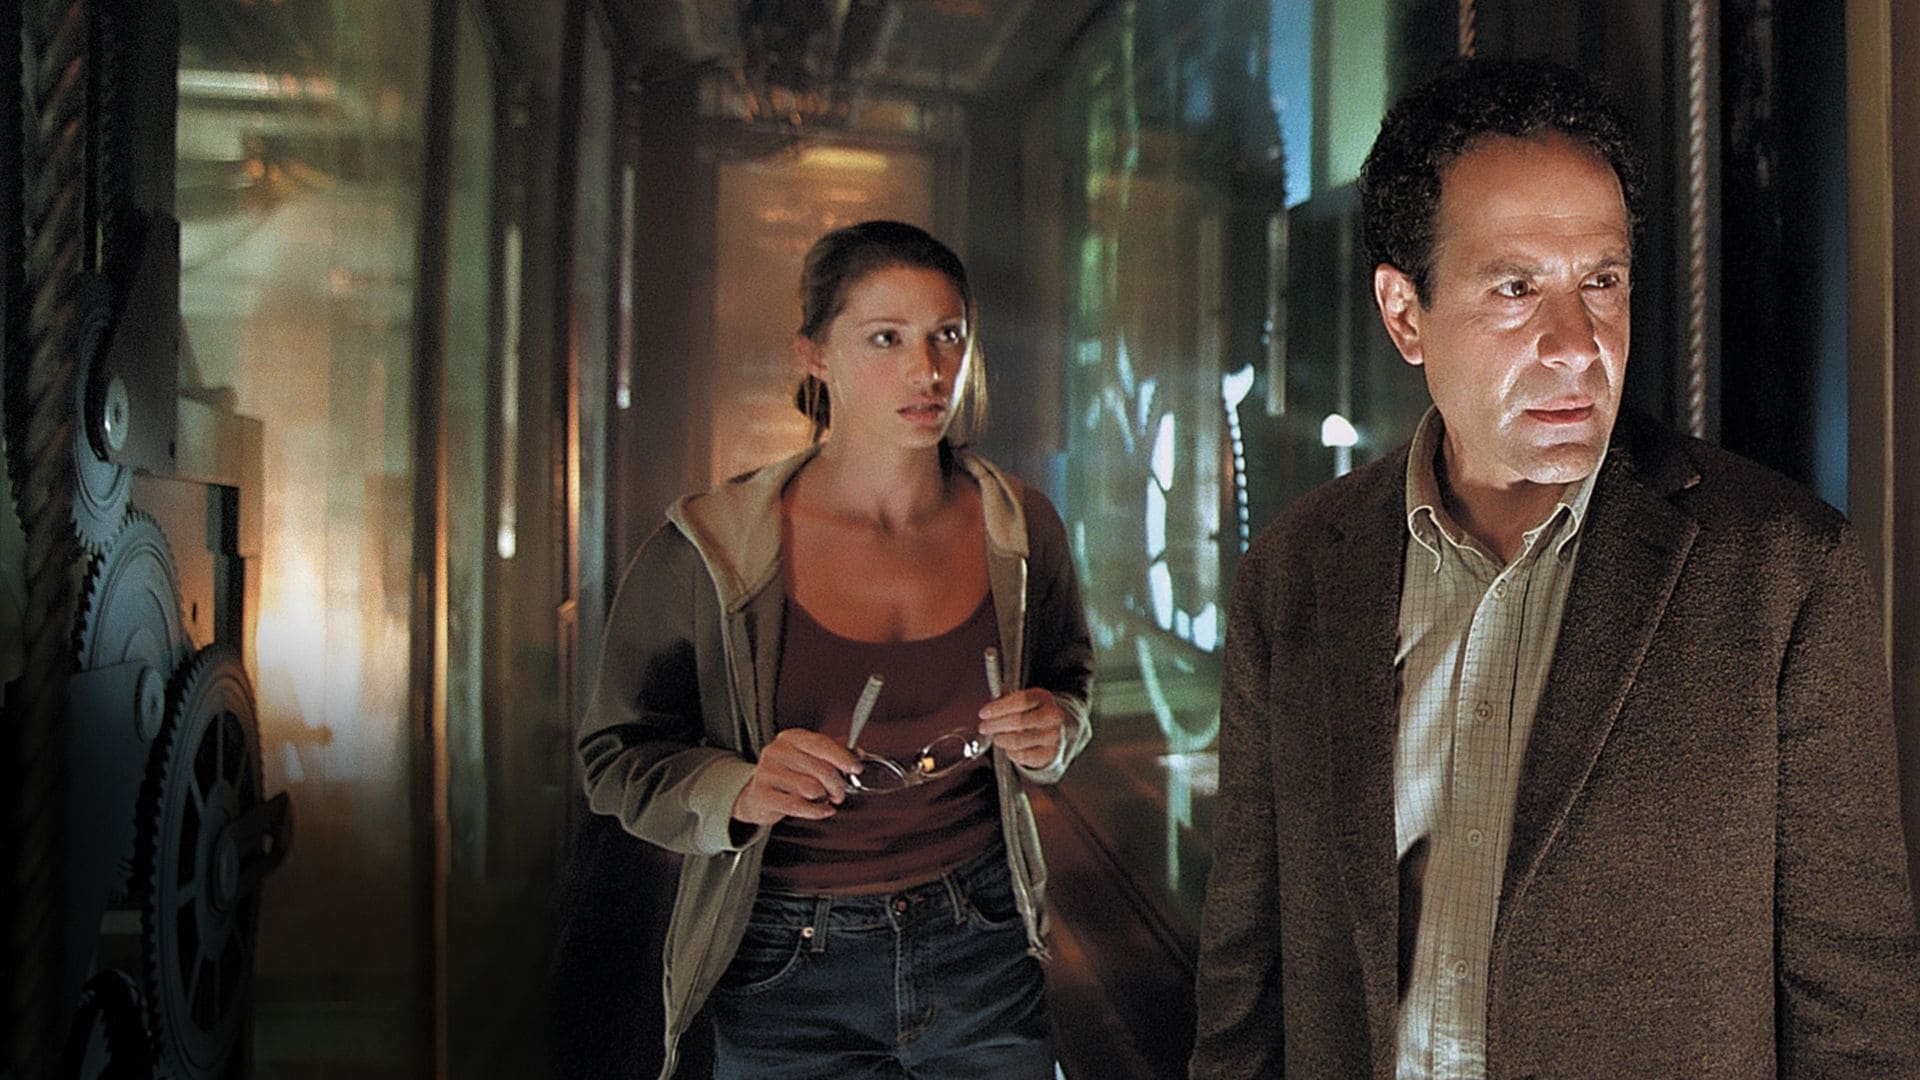 Screenshot from the film Thirt13en Ghosts. A man and a woman stand in a dark hallway near machinery. 